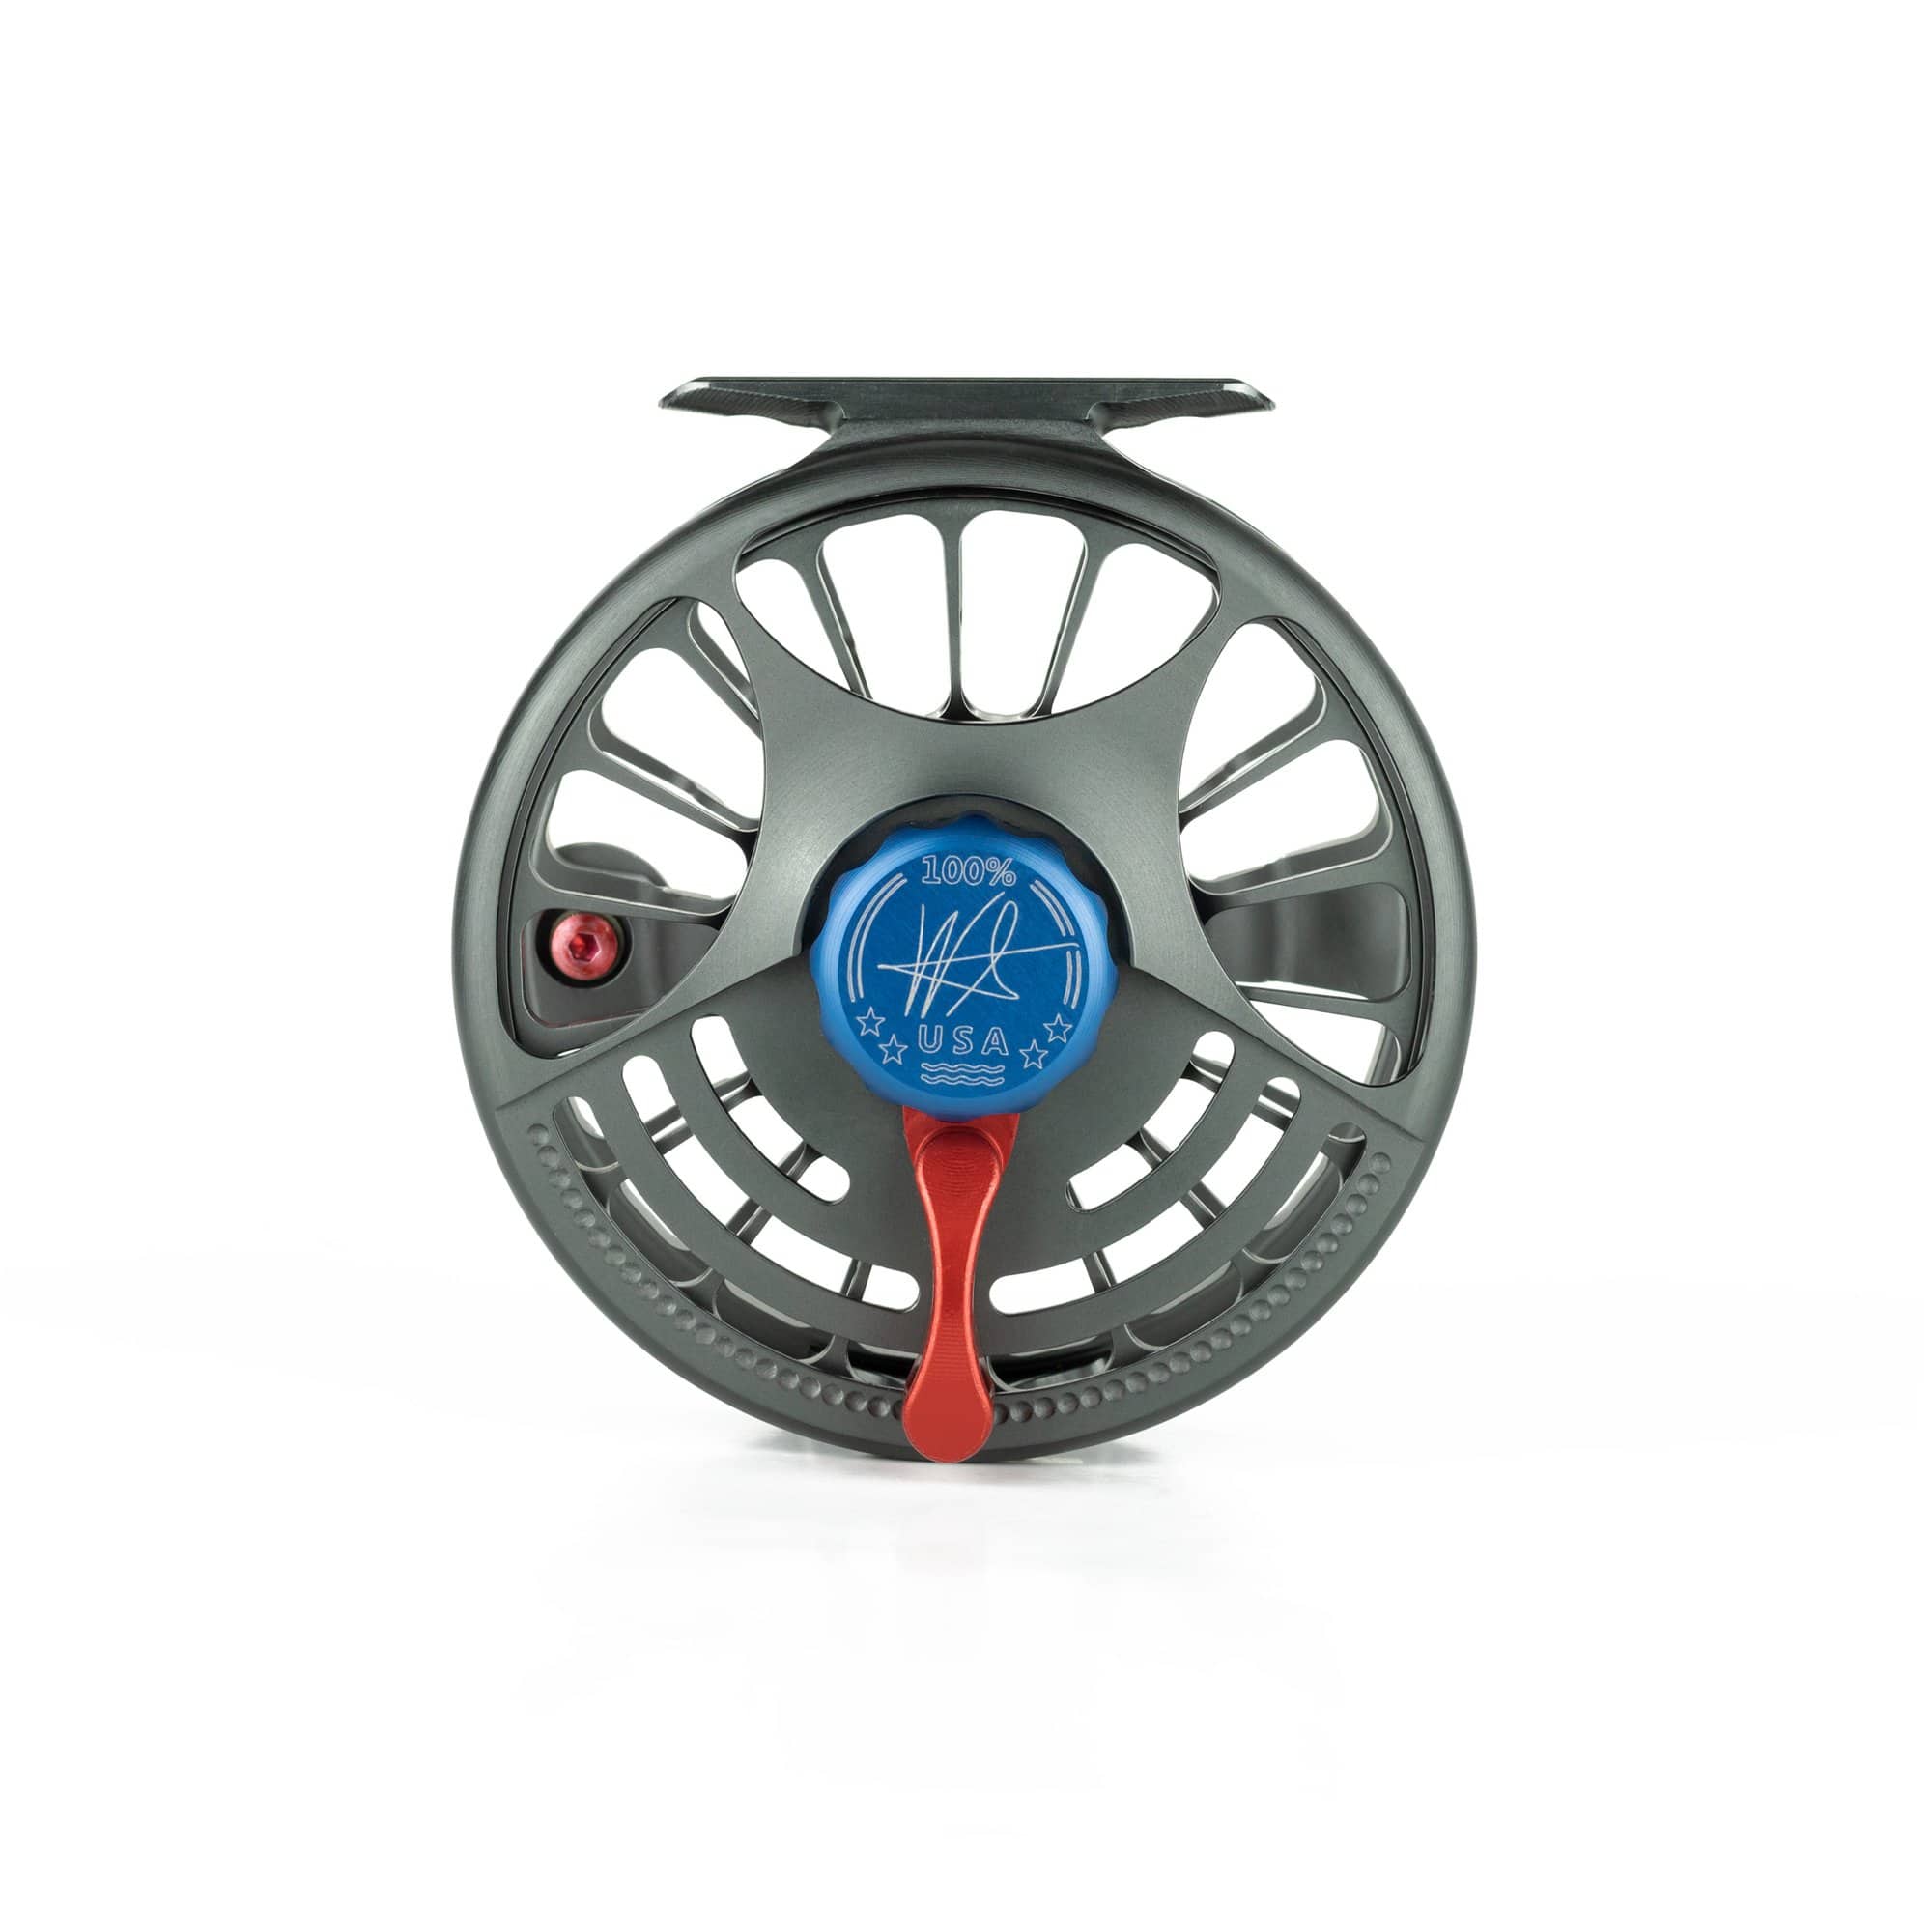 Seigler SF (Small Fly) Lever Drag Fly Reel Gunmetal with Red, Silver, & Blue Accents